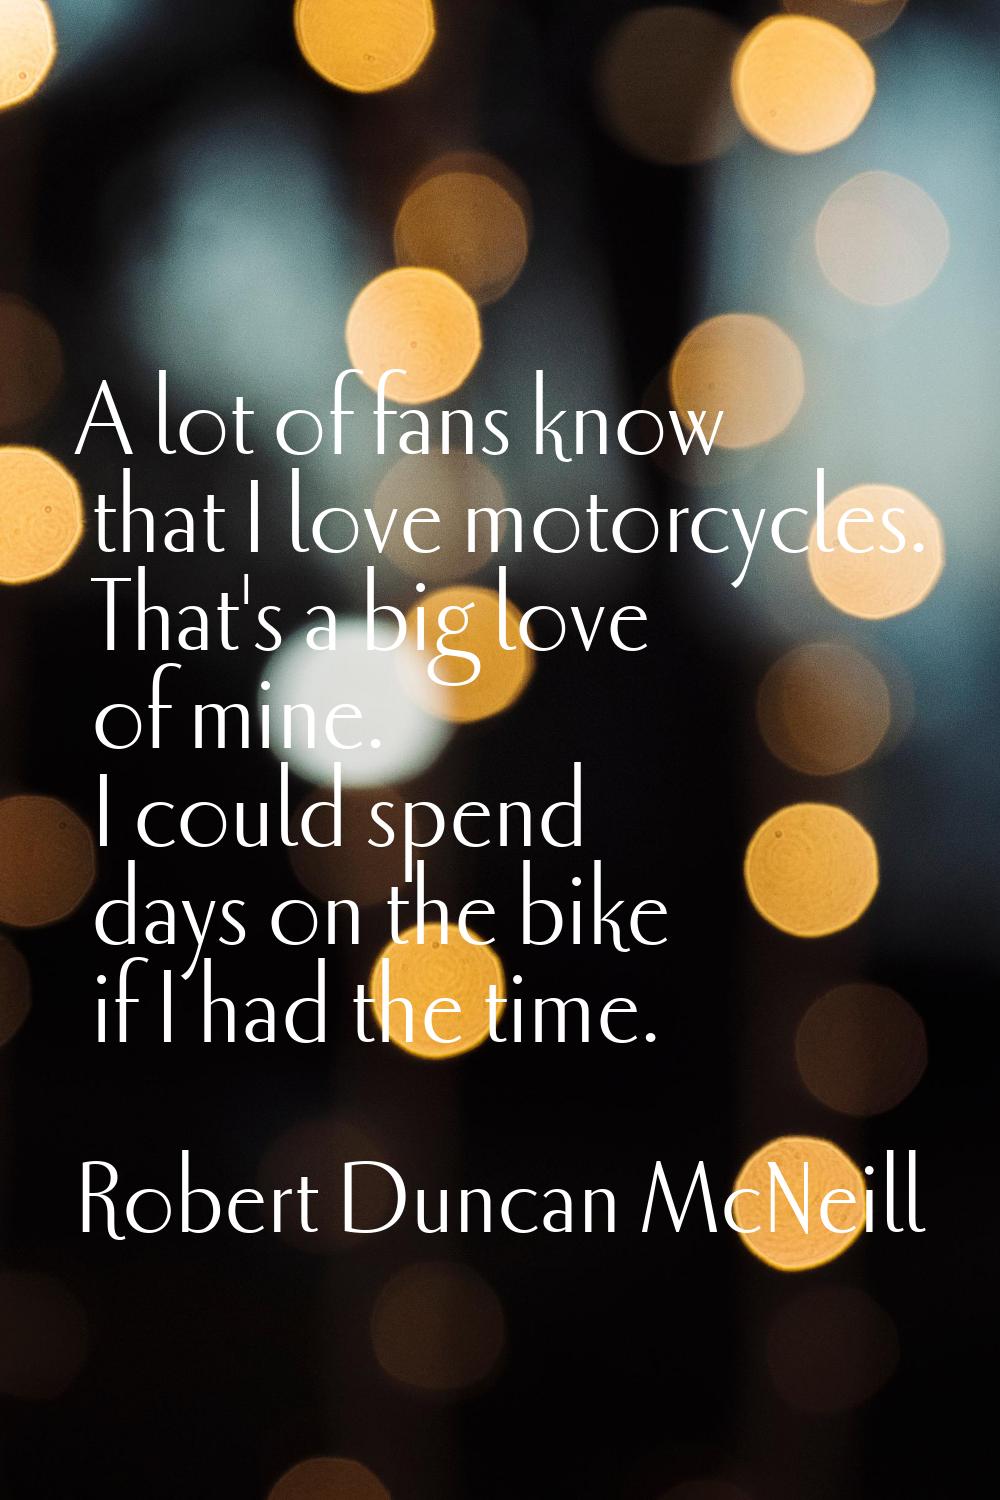 A lot of fans know that I love motorcycles. That's a big love of mine. I could spend days on the bi